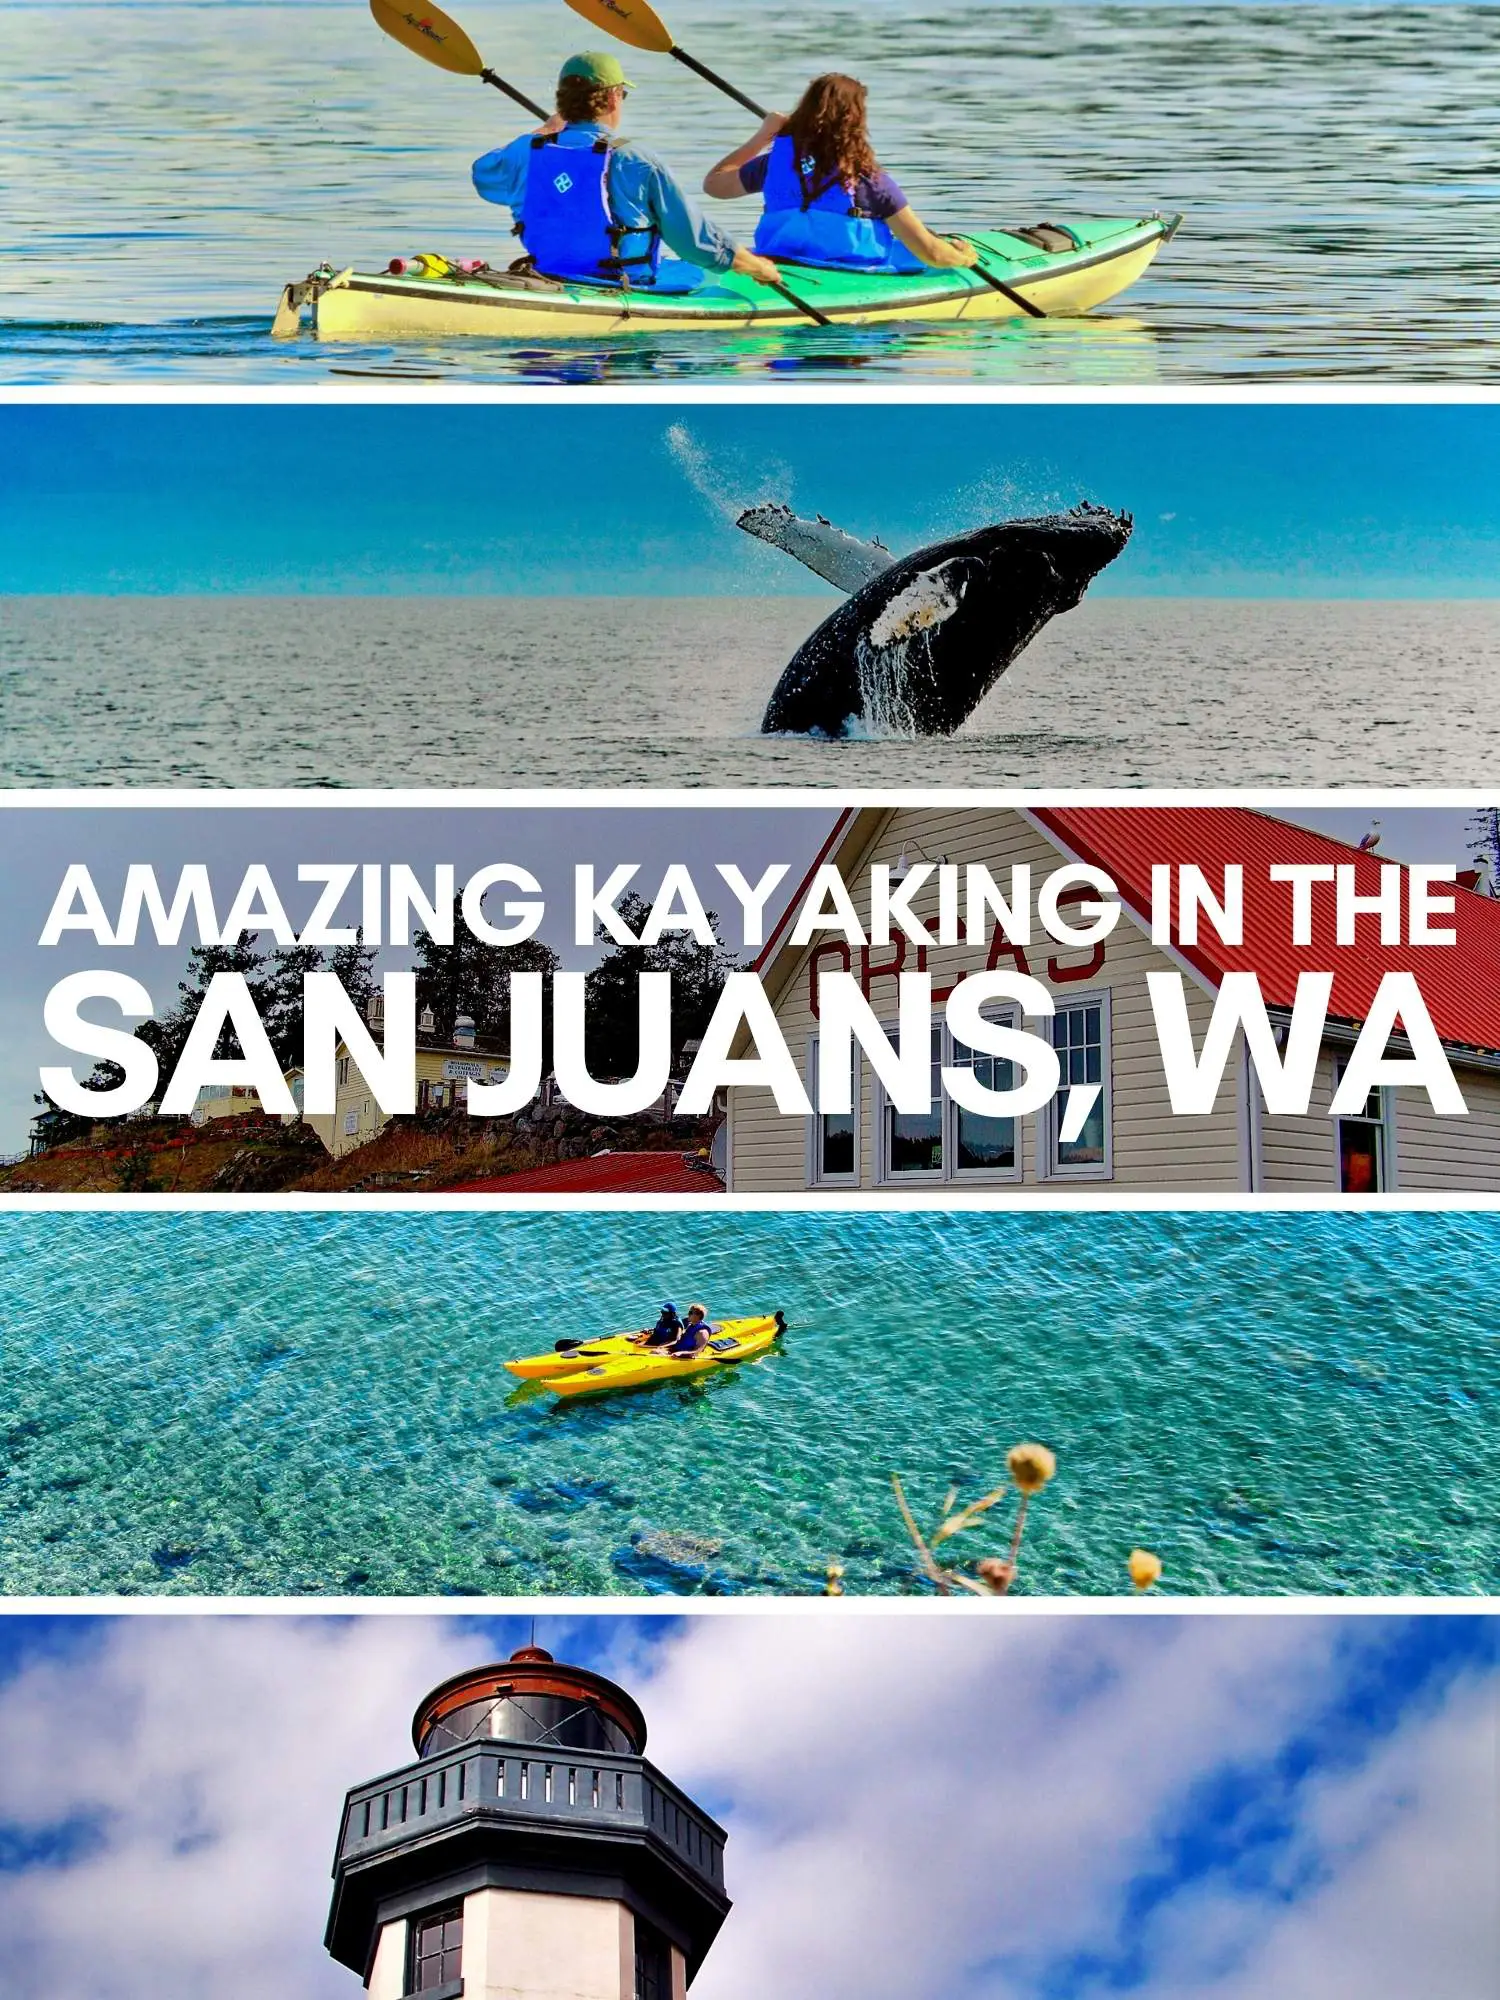 Best kayaking in the San Juan Islands of Washington. Kayak tours and best places to launch in the San Juans, including bioluminescence and kayaking with orcas near Seattle. Best places to launch kayaks on Orcas, Shaw, Lopez and San Juan Island.